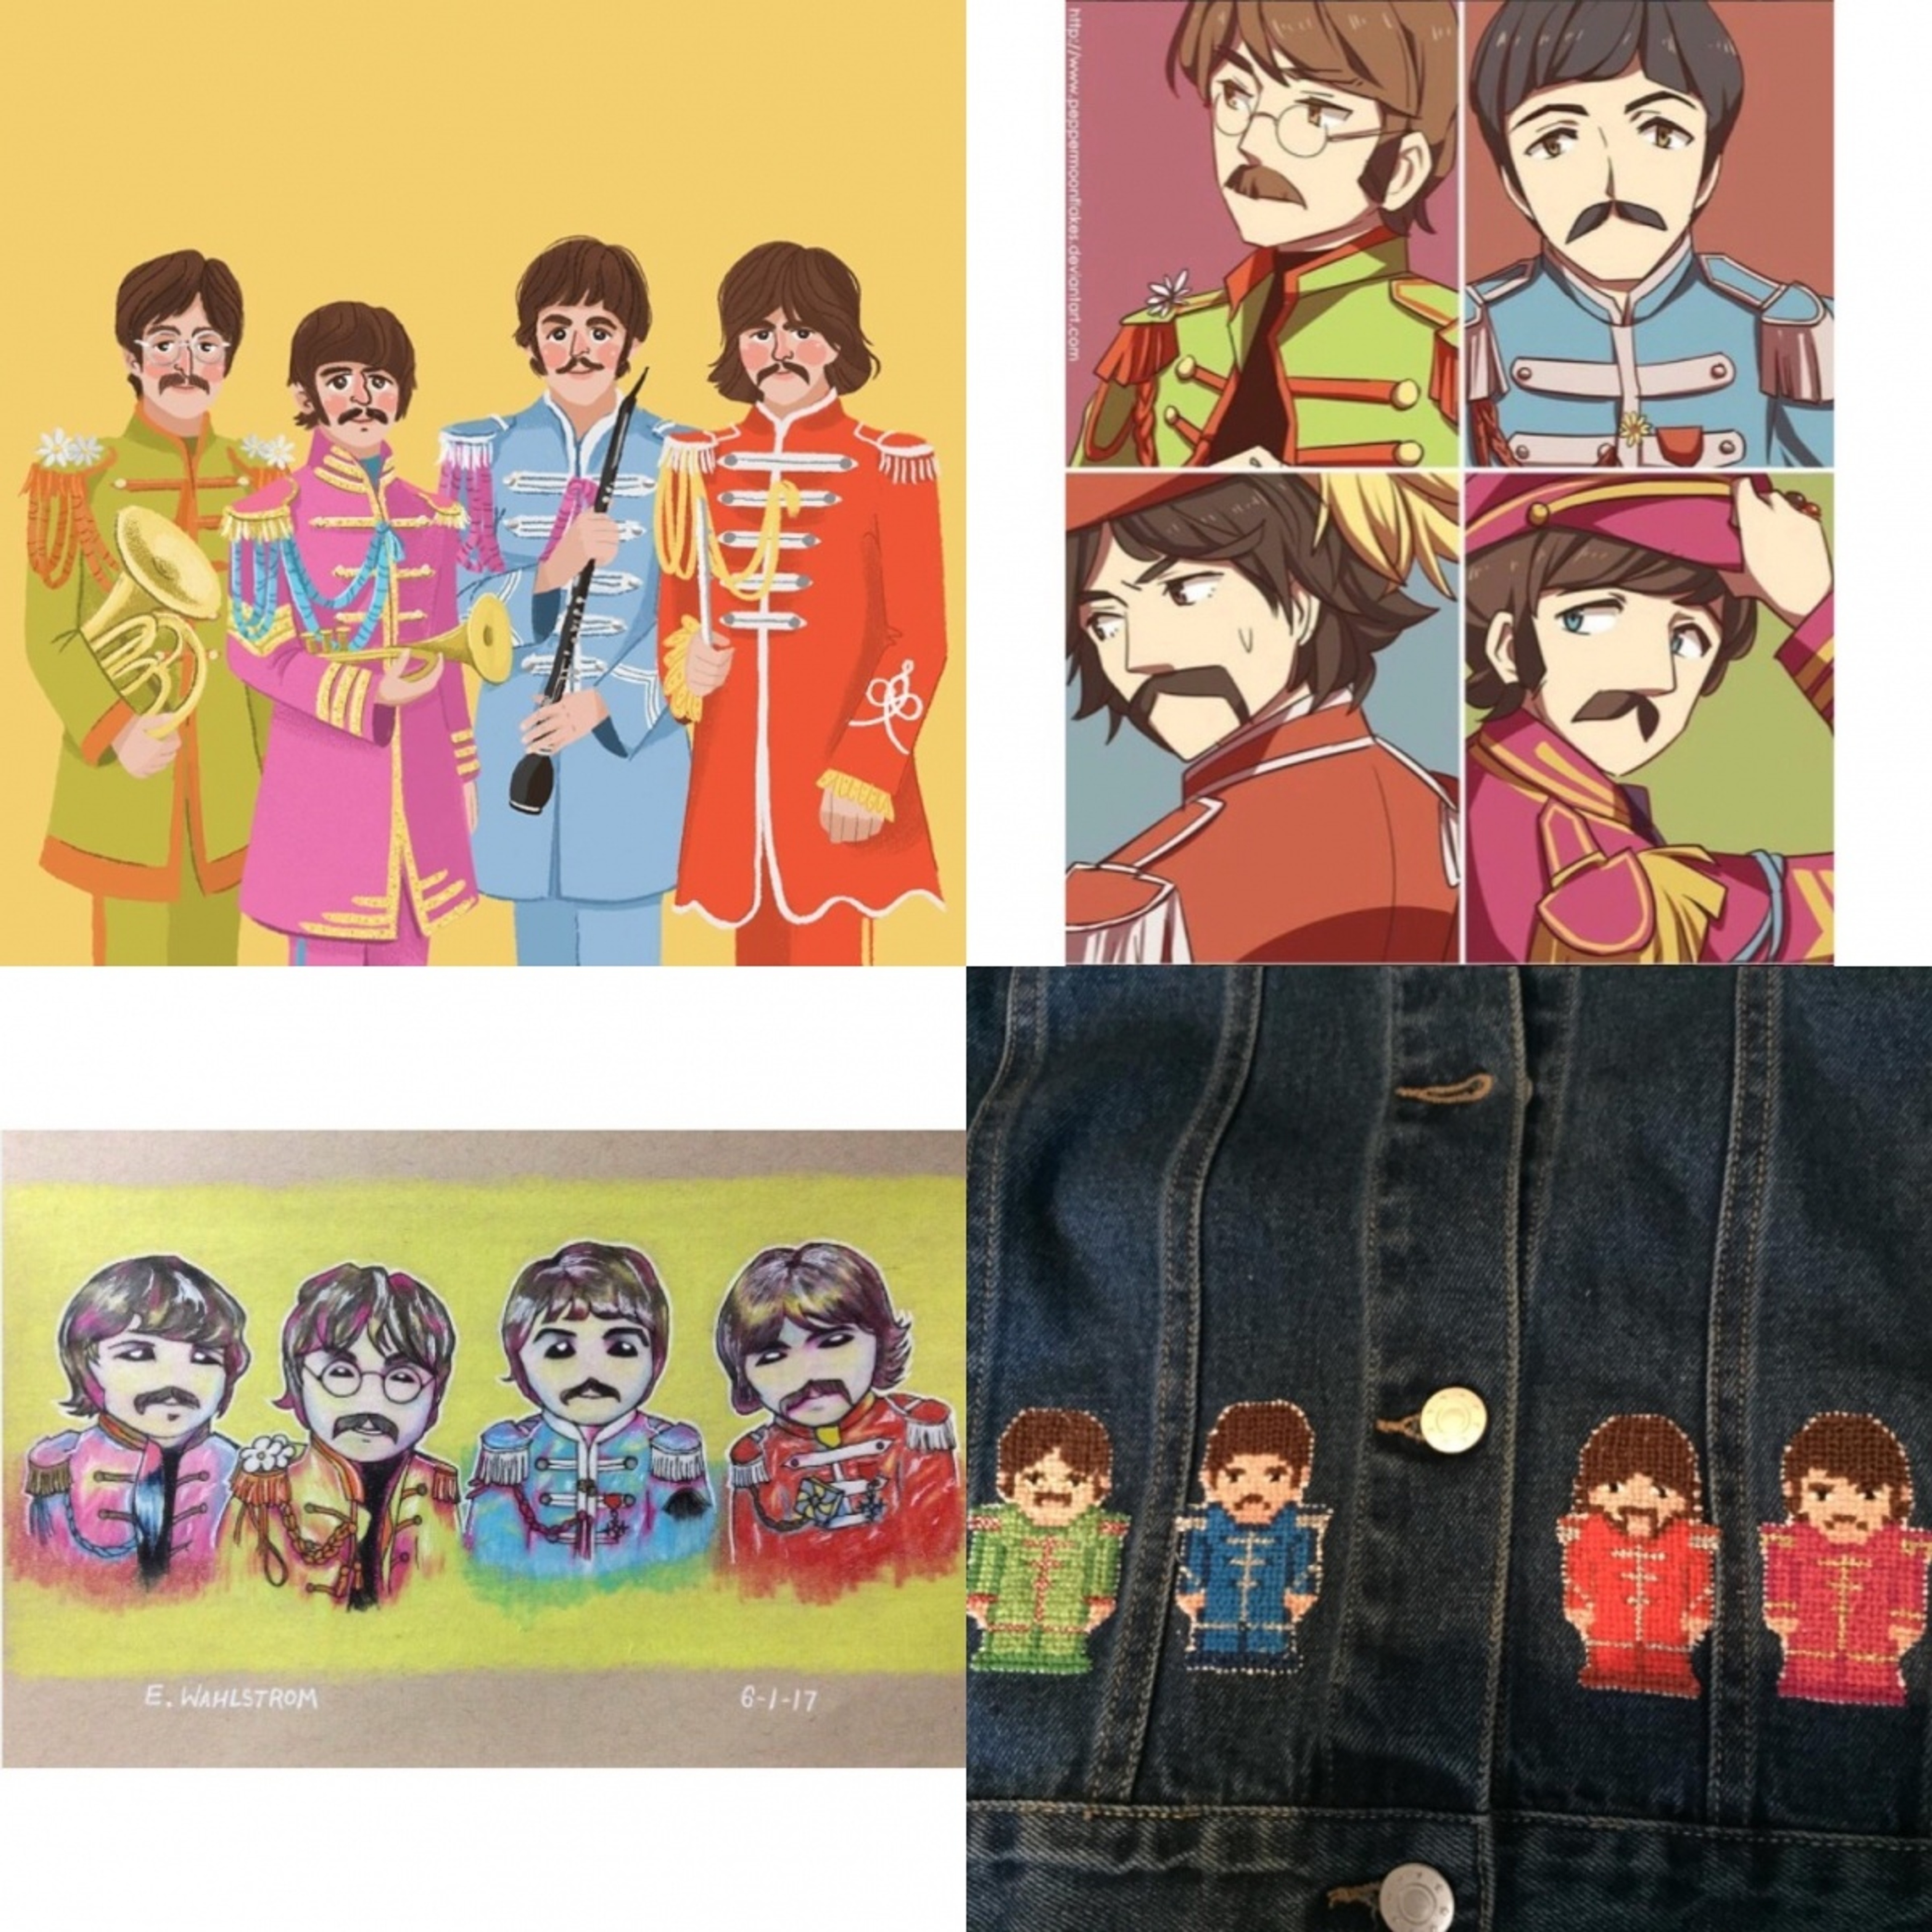 Sgt. Pepper fan art by Instagram users peppermoonflakes, georgeoliviaharrison, elsa_wahlstrom and sandylandcrabs!